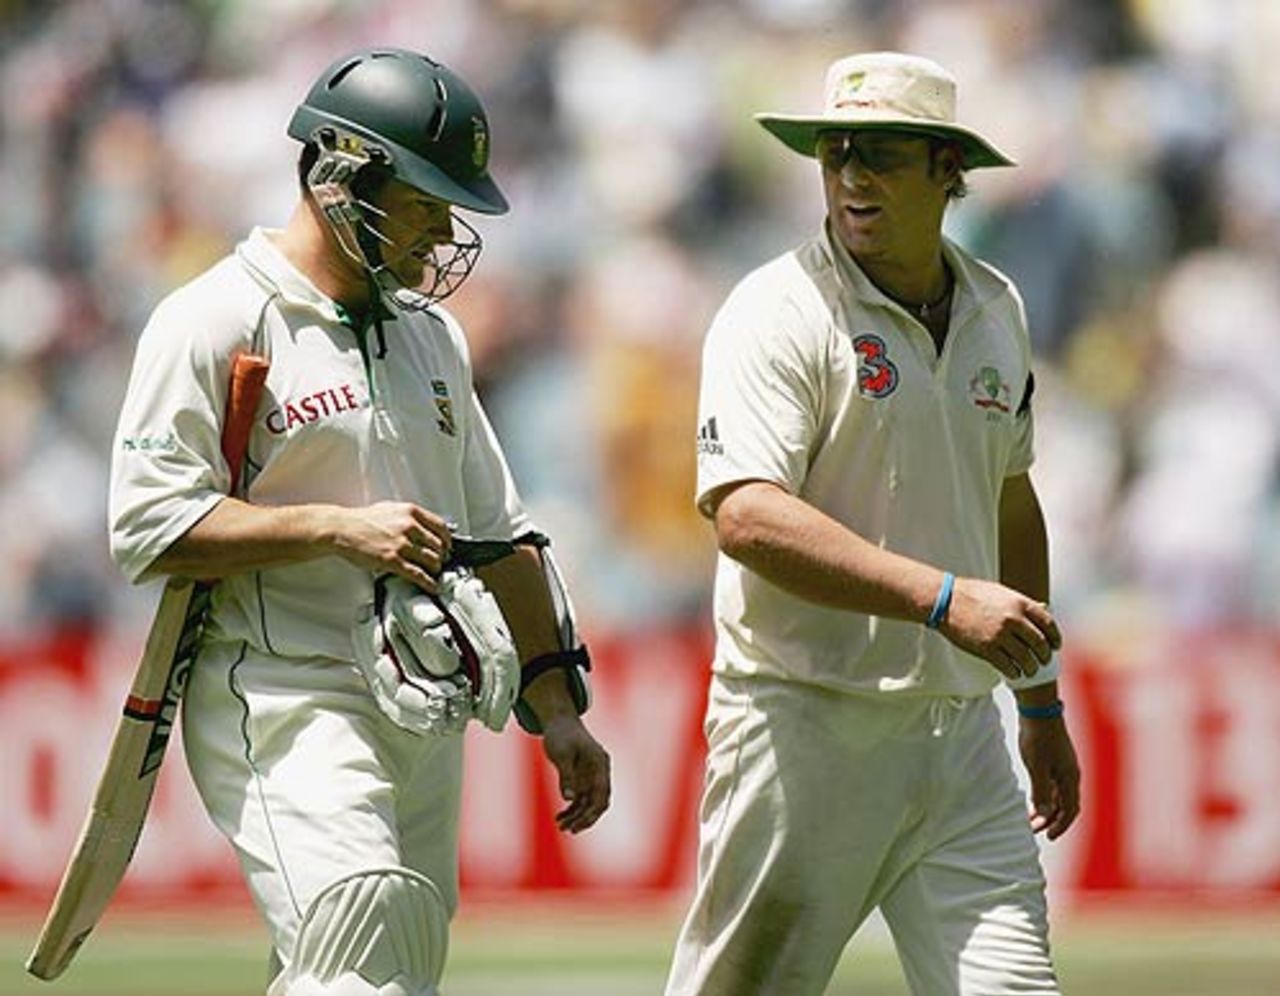 Shane Warne has a word - or two - for Mark Boucher as he walks off , Australia v South Africa, 2nd Test, Melbourne, 3rd day, December 28, 2005